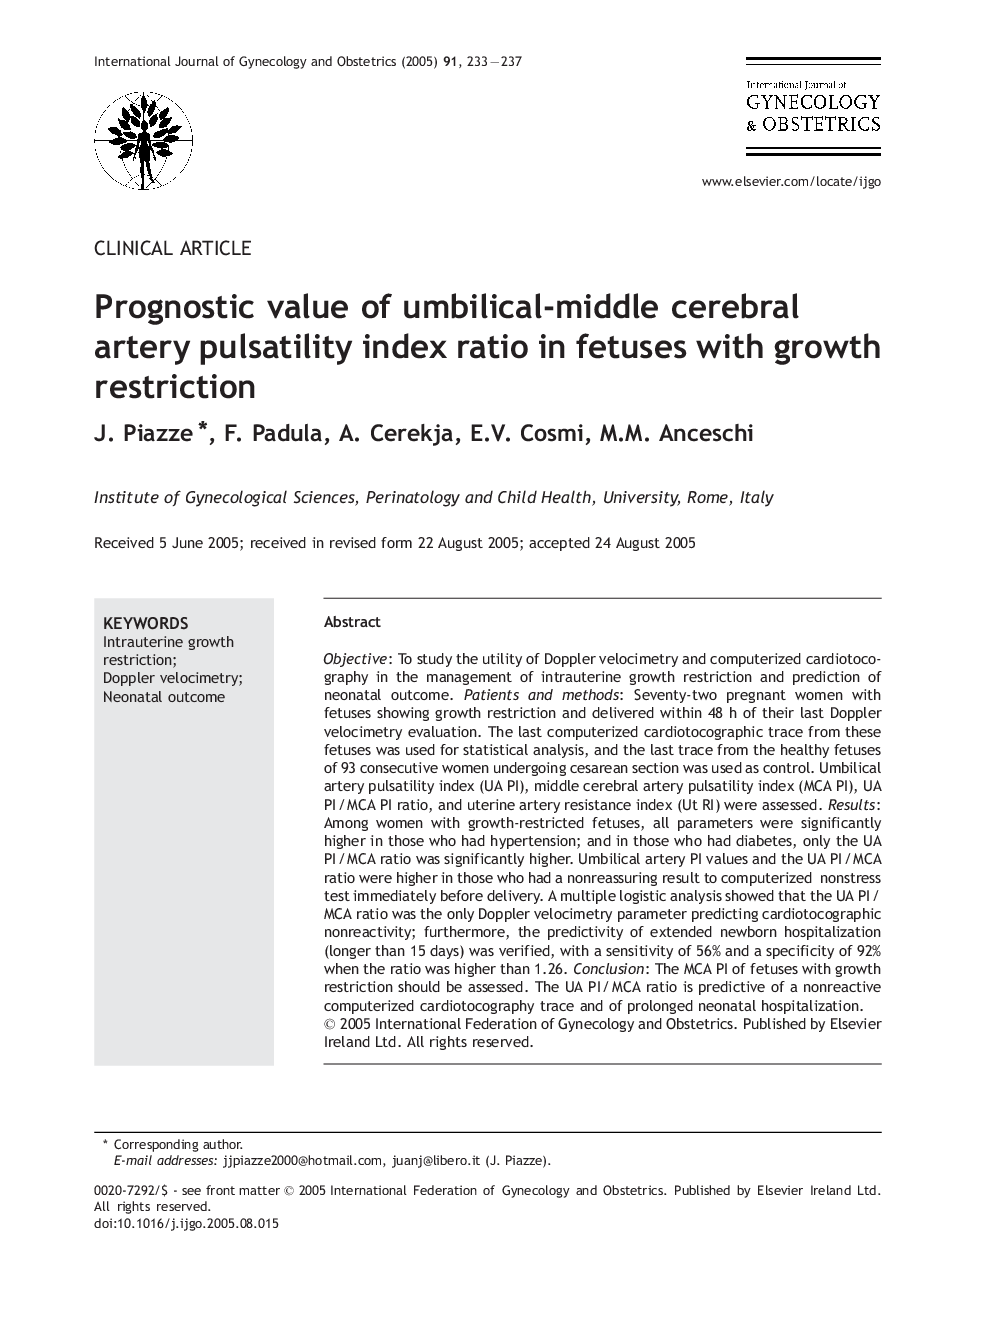 Prognostic value of umbilical-middle cerebral artery pulsatility index ratio in fetuses with growth restriction